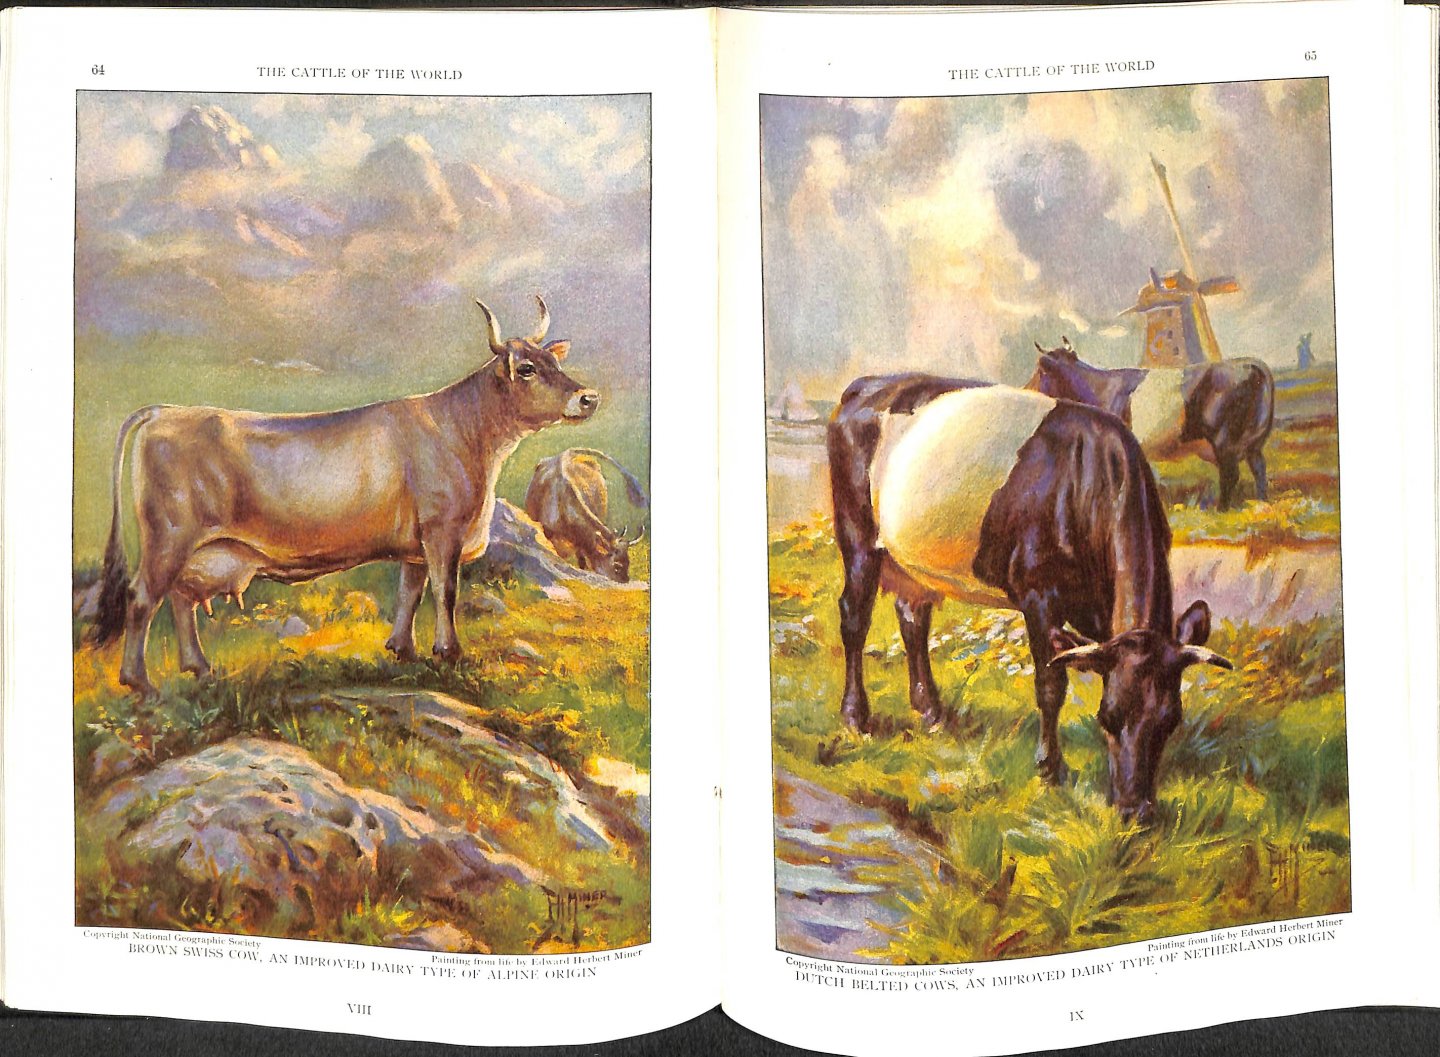 Sanders, Alvin Howard - The cattle of the world. Their place in the human scheme - wild types an modern breeds in many lands